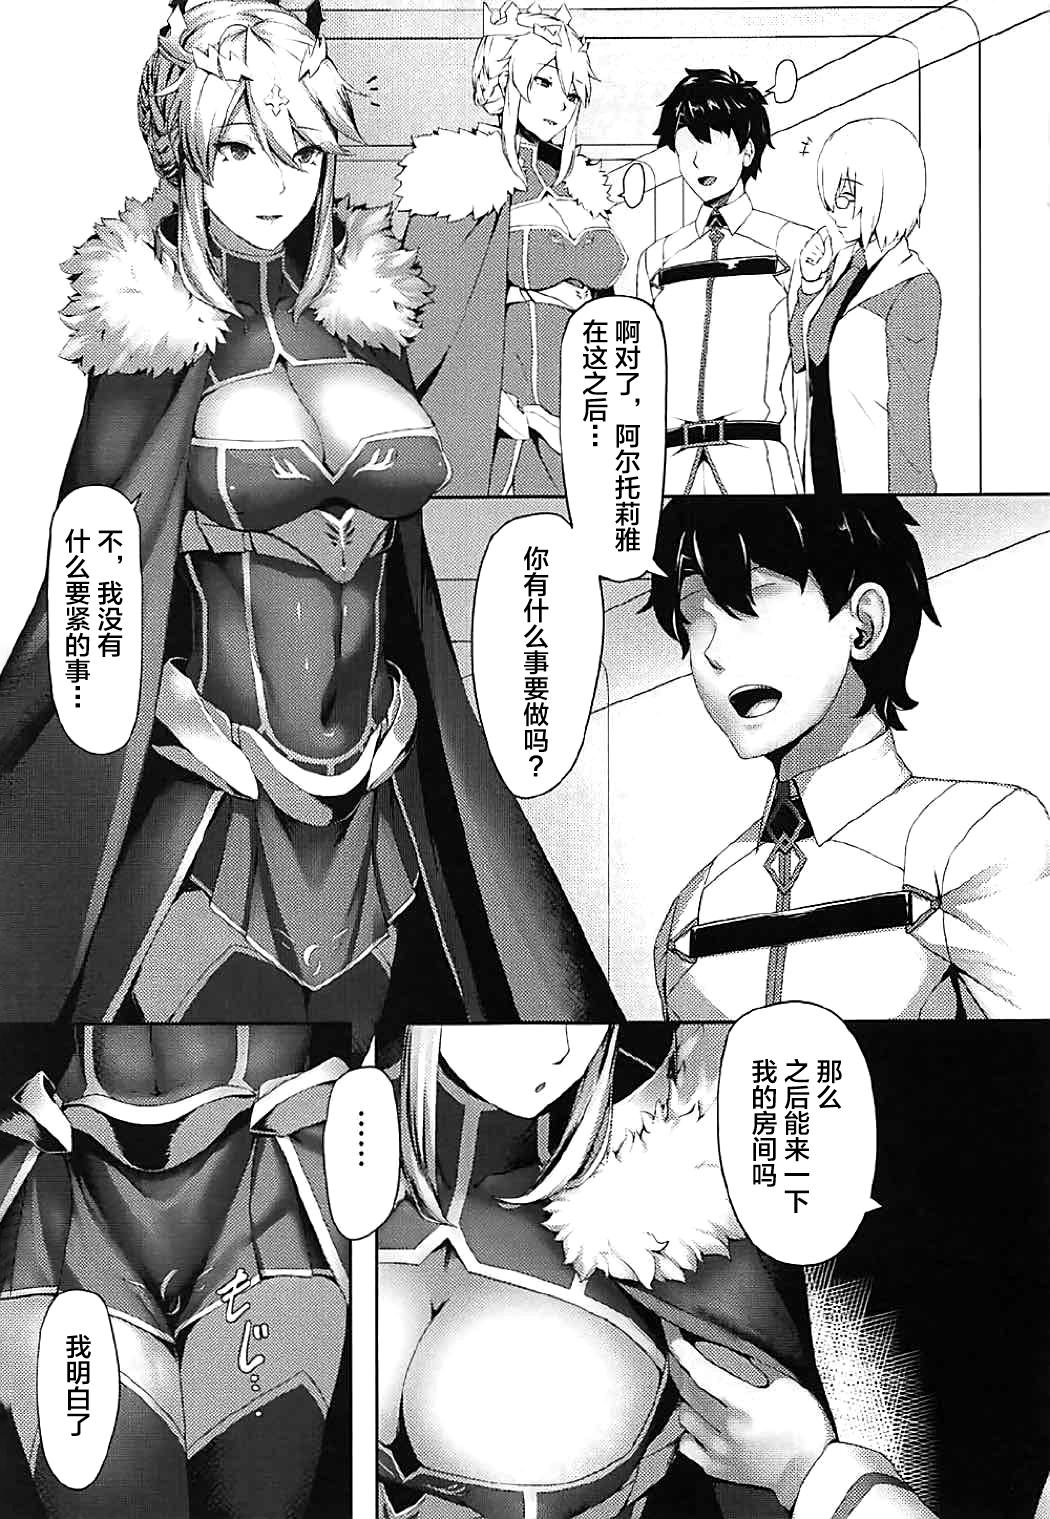 Titties What do you like? - Fate grand order Canadian - Page 2